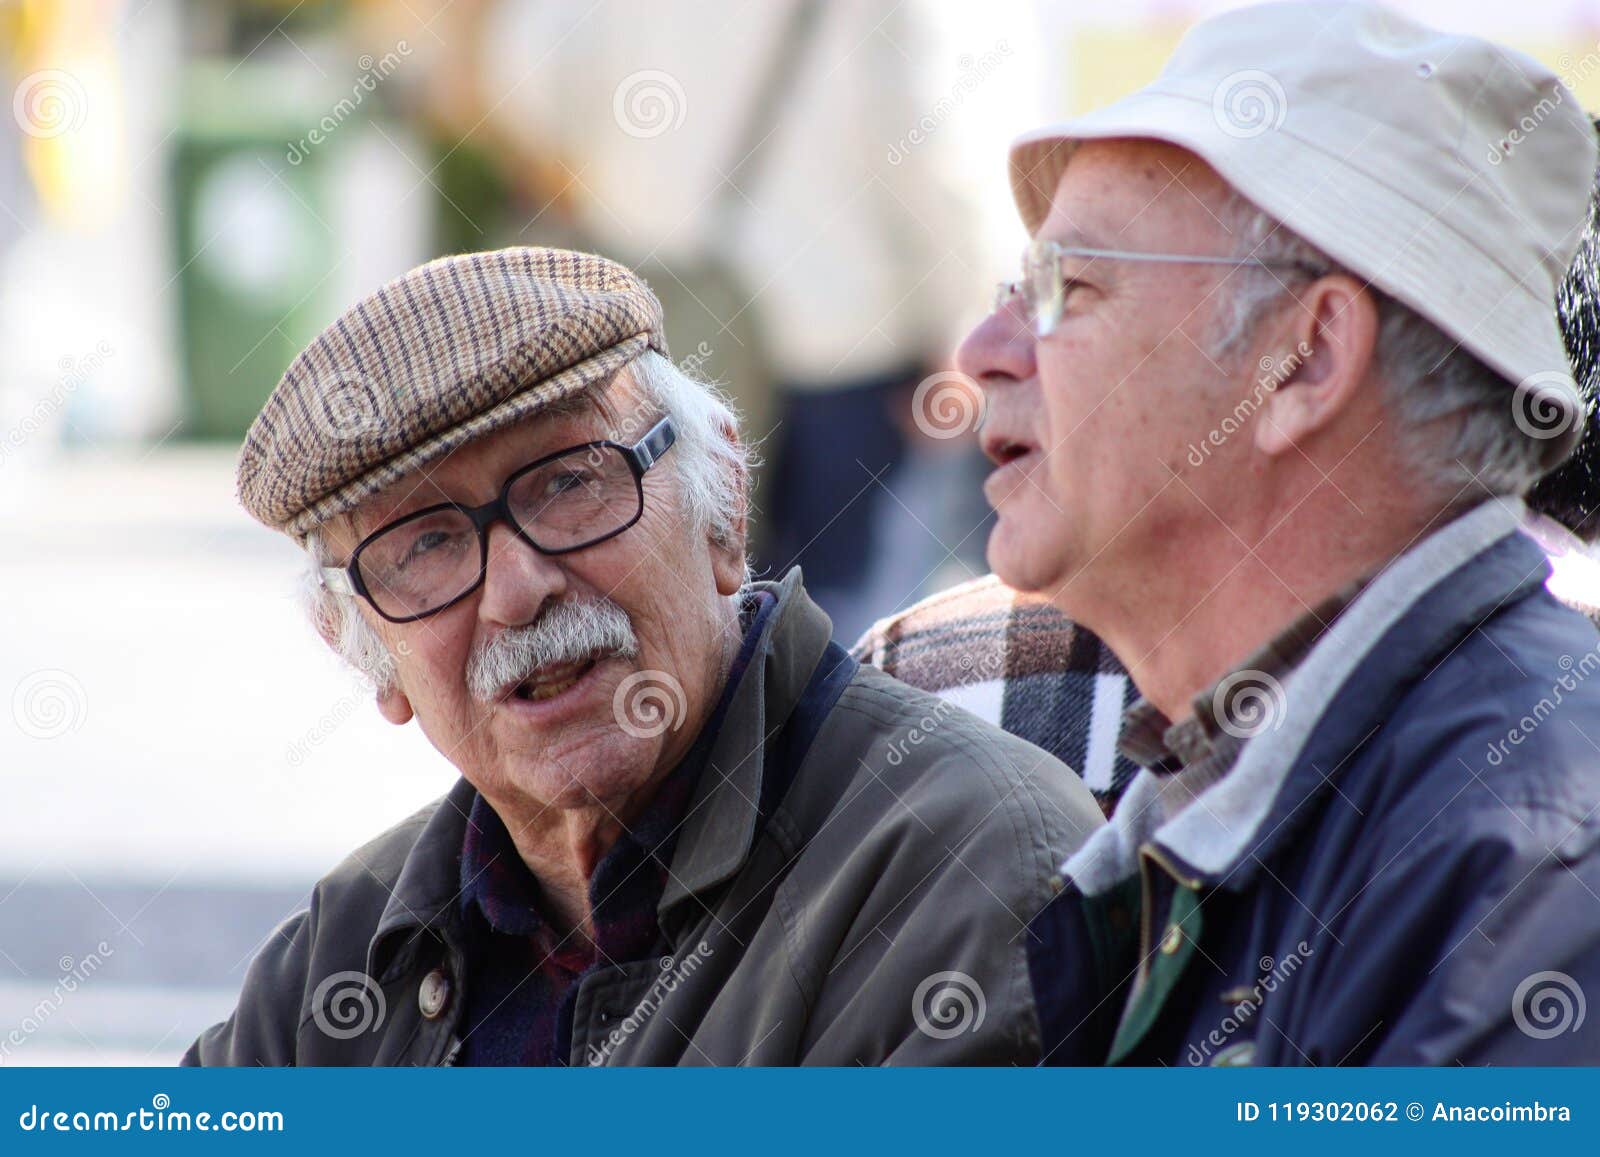 portugal-country-full-old-people-soon-will-have-unsustainable-number-pensioners-supported-declining-workforce-low-birth-119302062.jpg